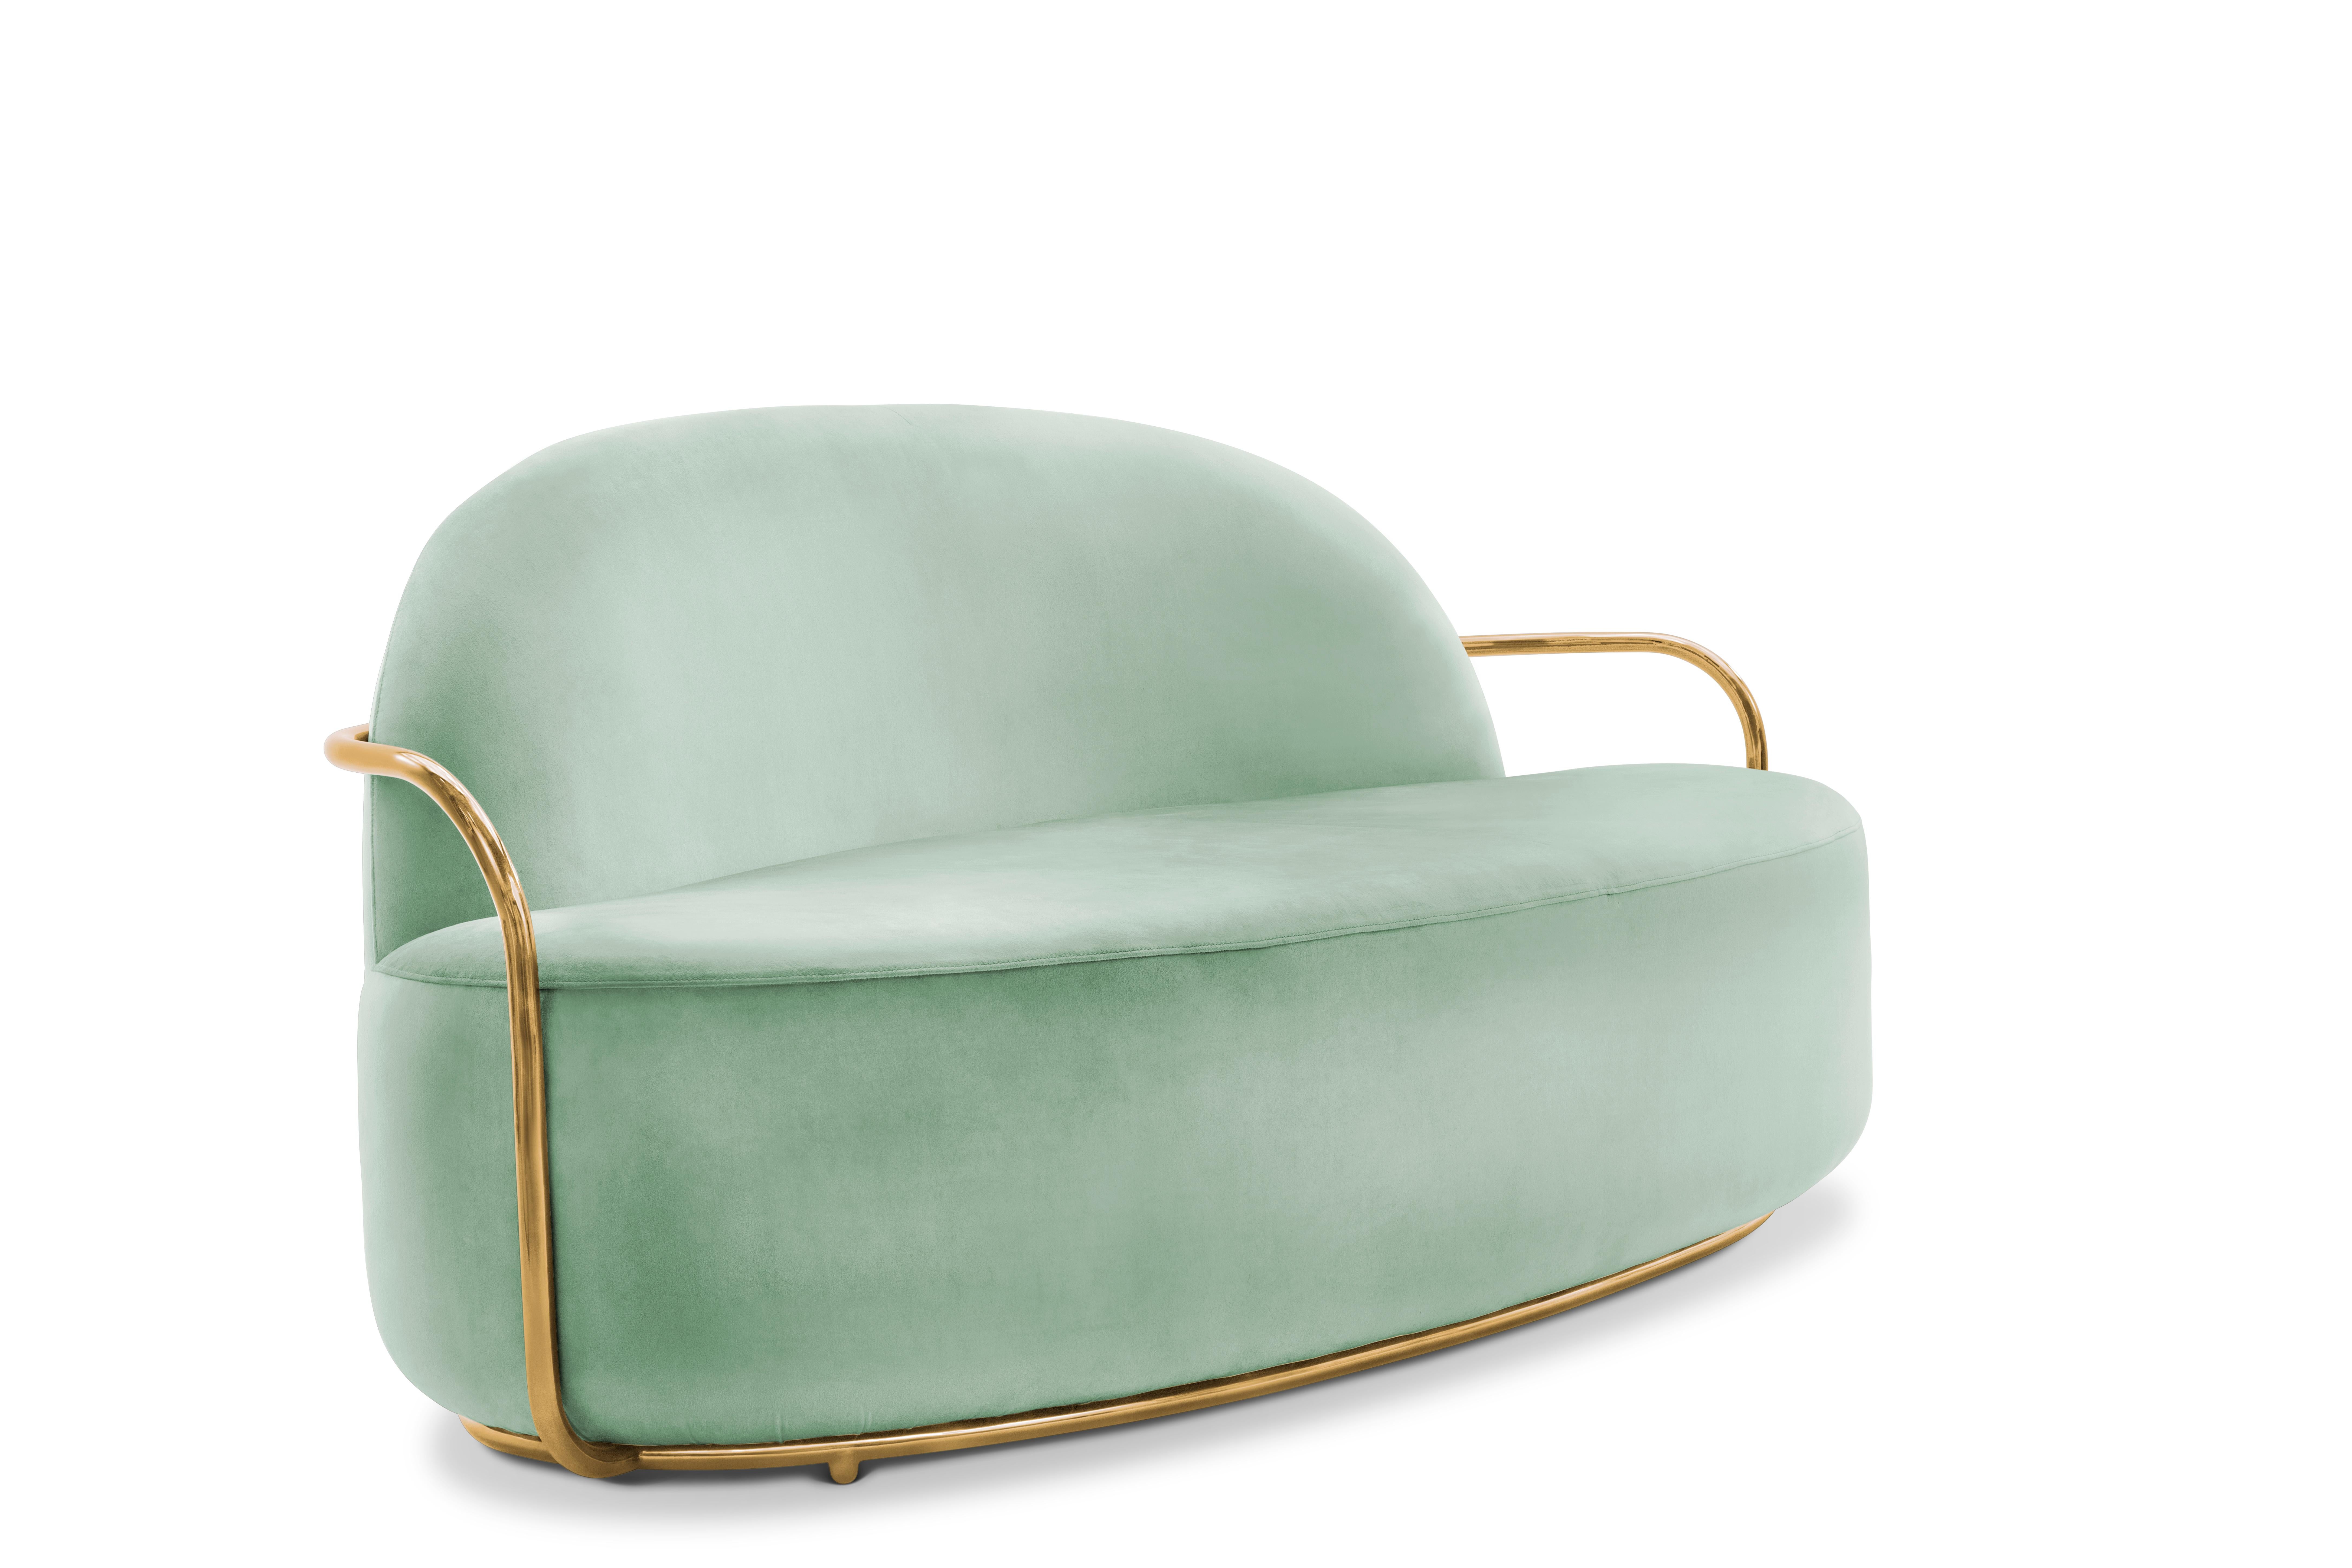 The comfort of Orion 3 Seat Sofa with Plush Mint Green Velvet and Gold Arms by Nika Zupanc compliments the cool mint green velvet and gold metal arms.

Nika Zupanc, a strikingly renowned Slovenian designer, never shies away from redefining the